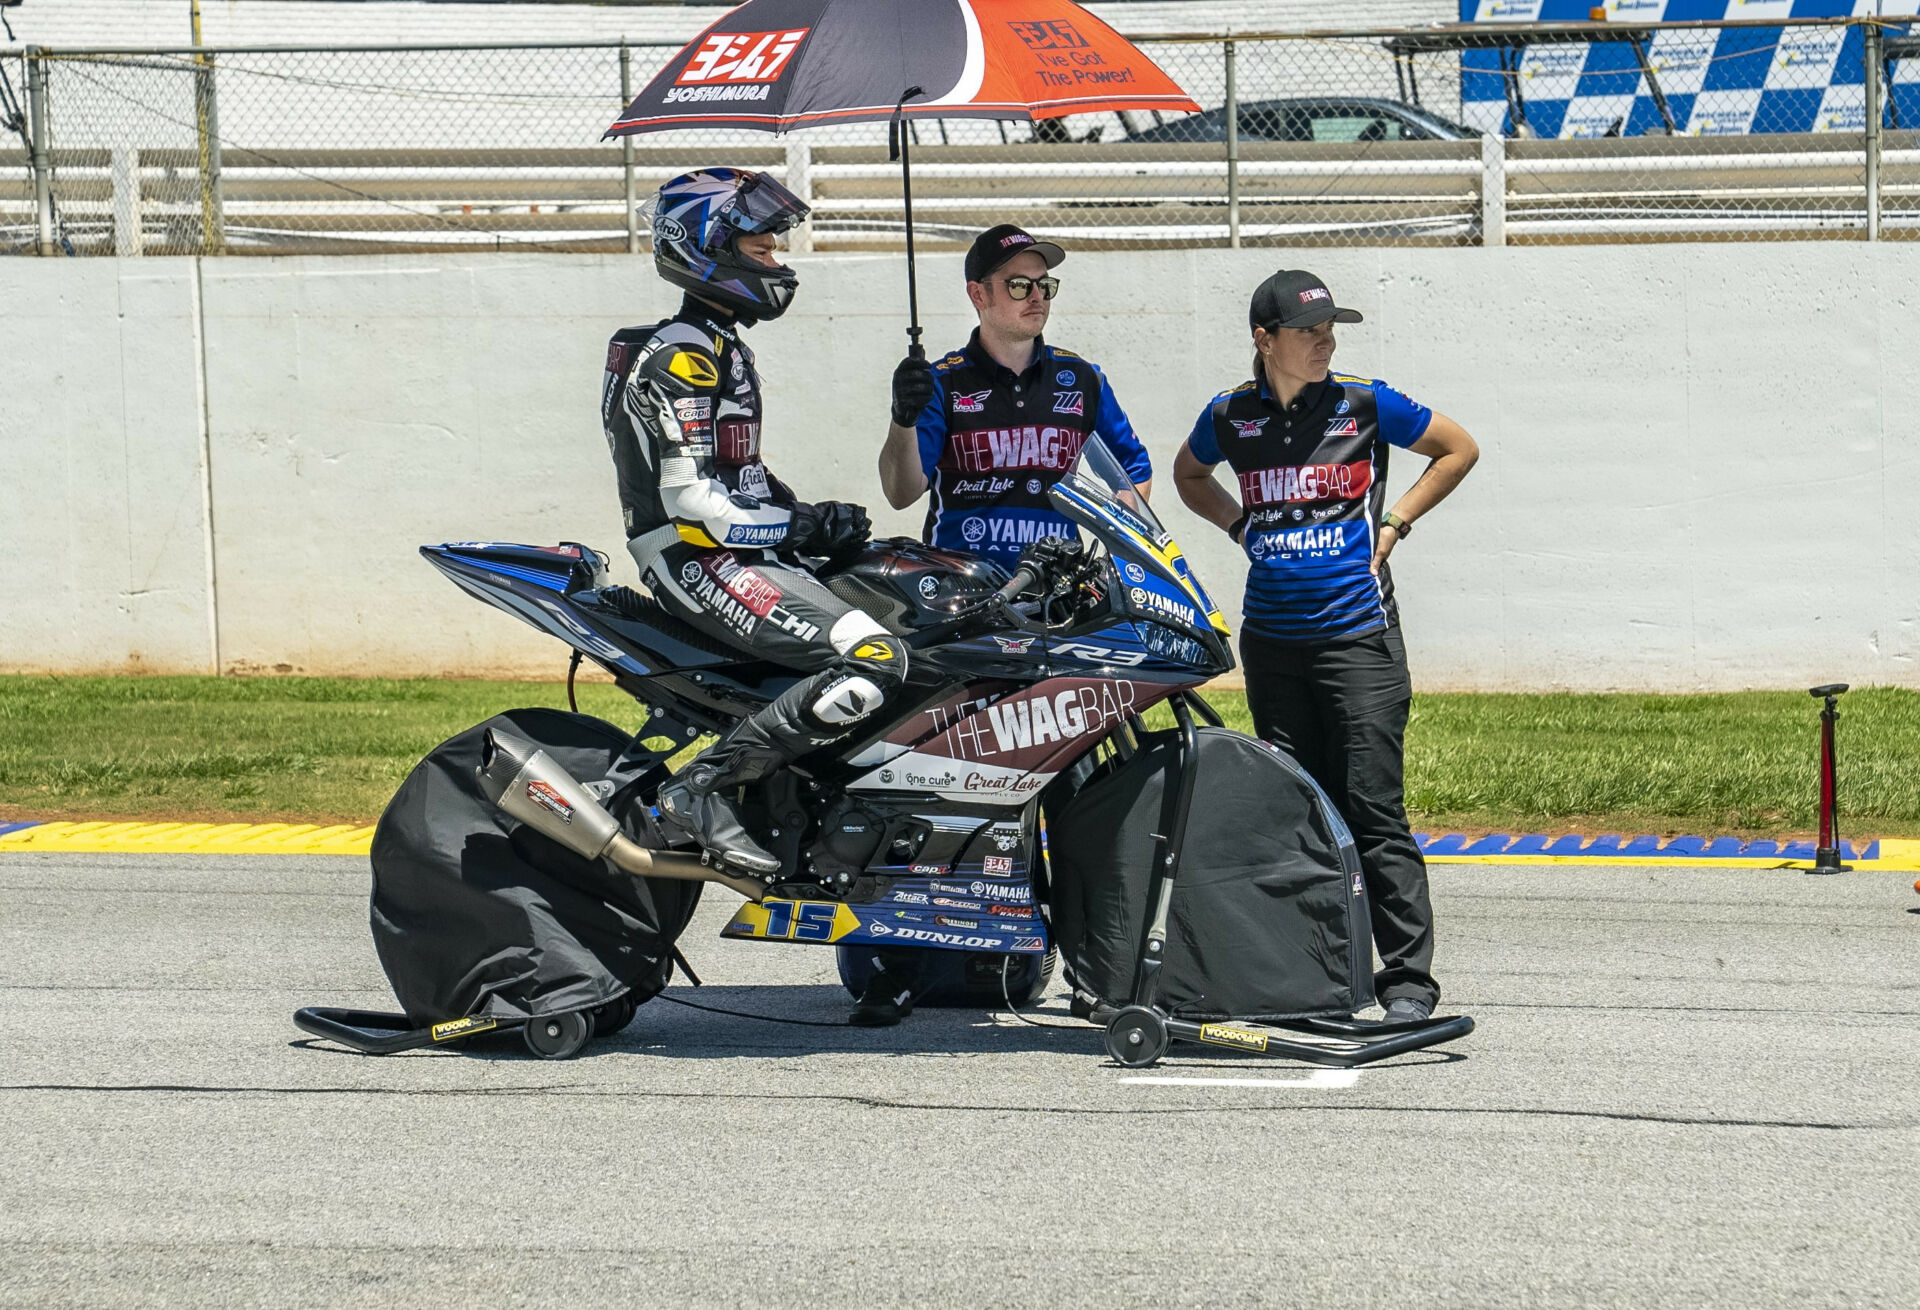 Rookie Pro racer Aiden Sneed on the grid with his The WagBar MP13 Racing Team at Road Atlanta. Photo courtesy The WagBar MP13 Racing Team.